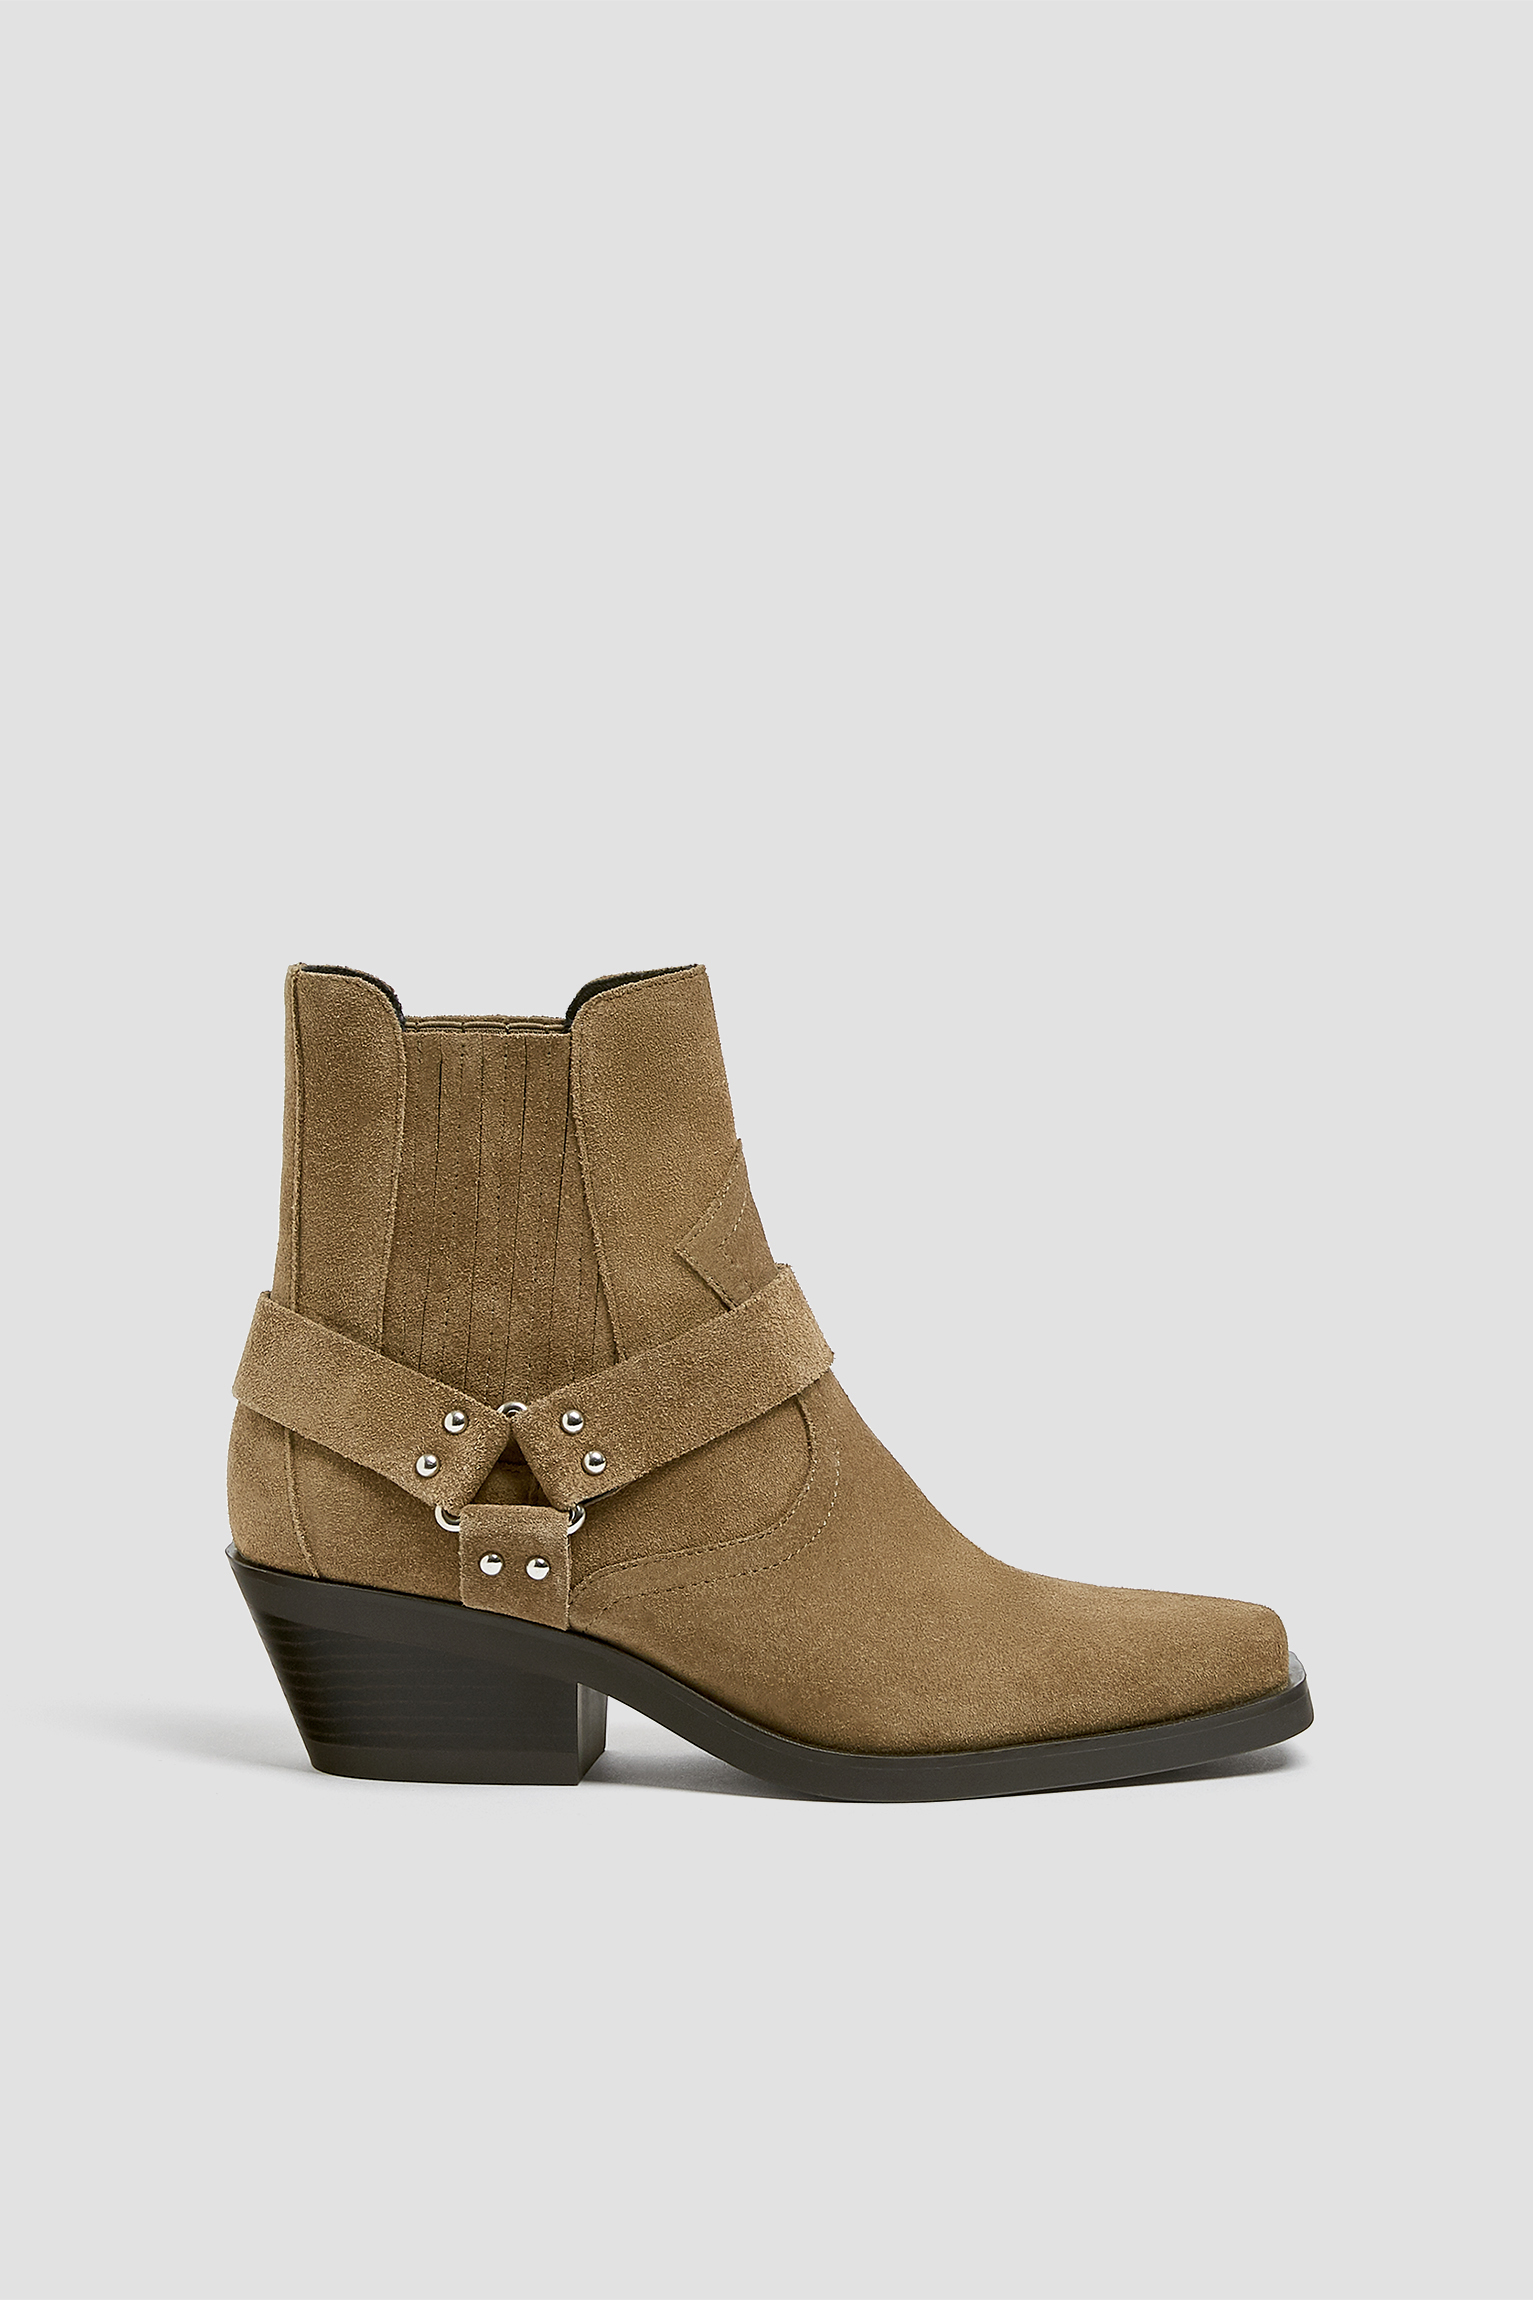 leather square toe ankle boots